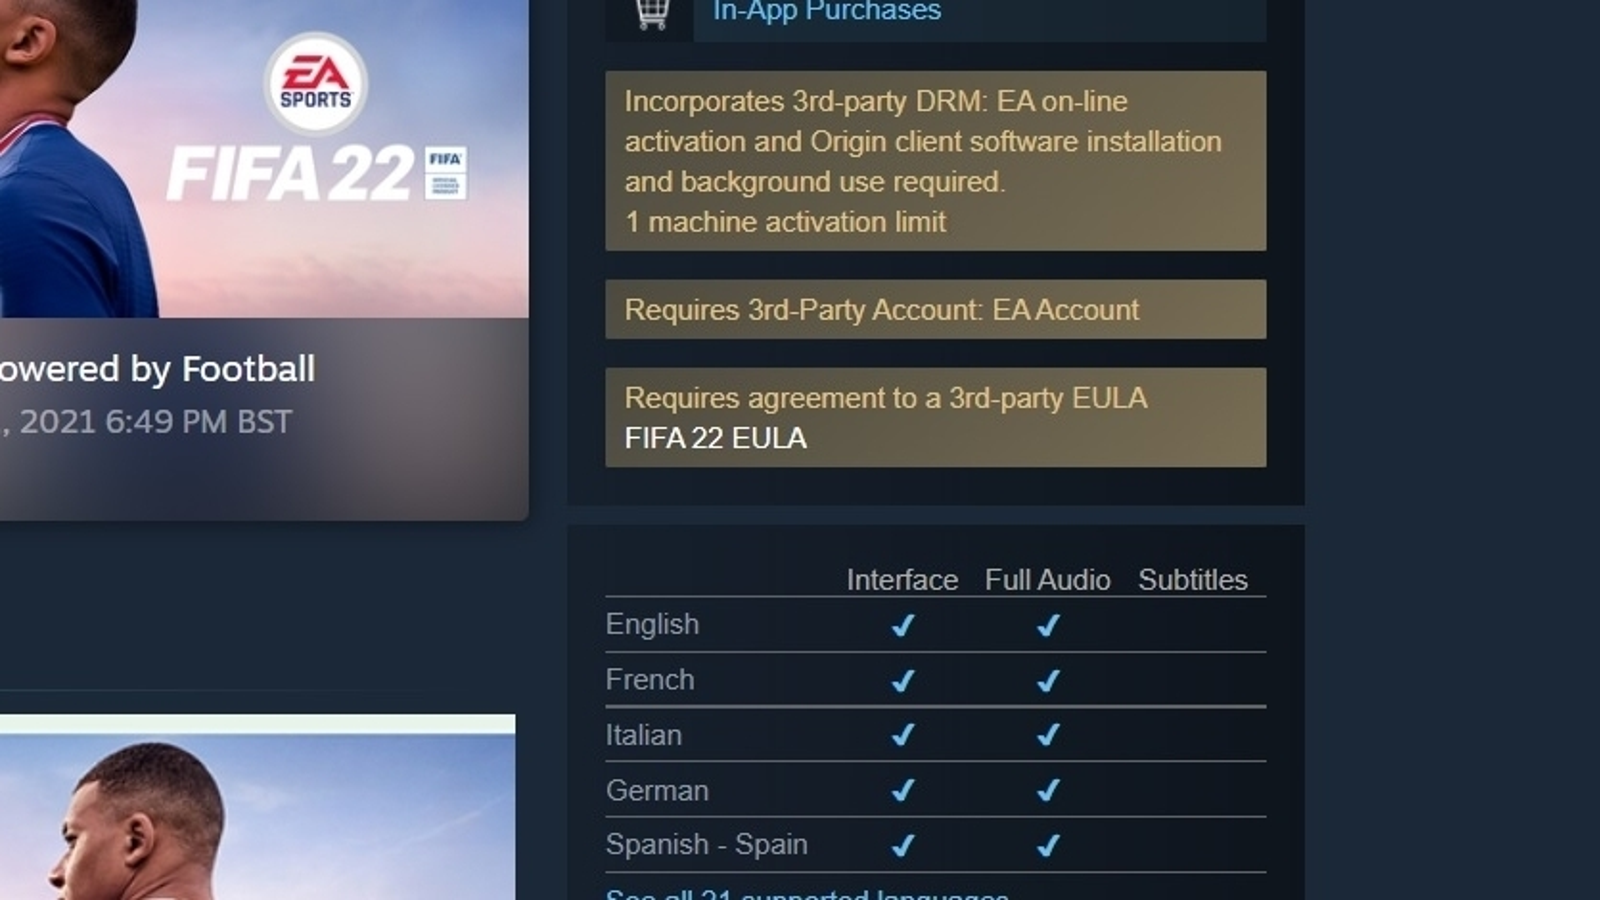 How To Get Free Fifa 22 Pc Origin Key Code With Proof : r/fifa22pc